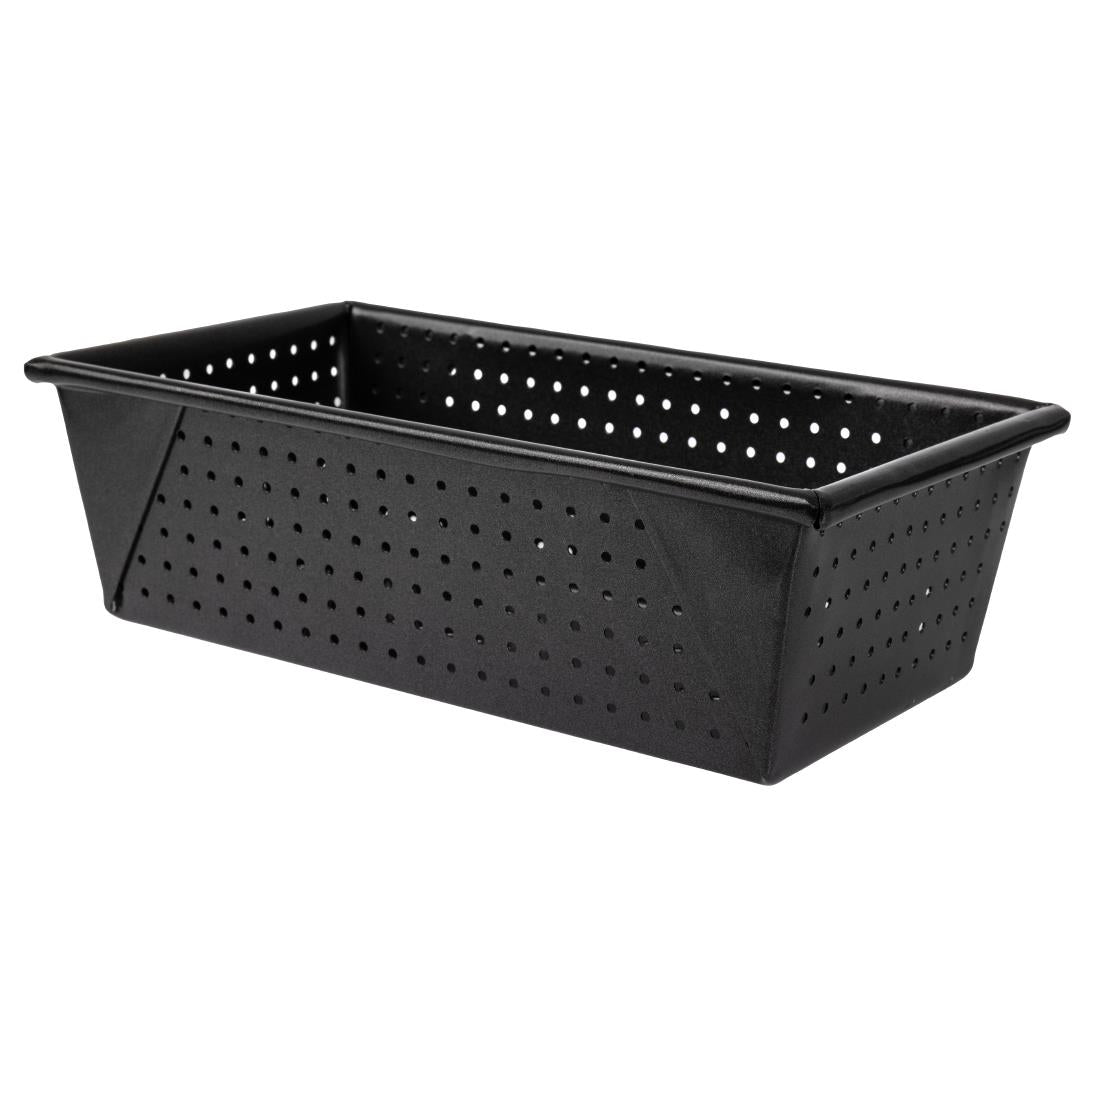 CS565 Masterclass Crusty Bake Perforated Loaf Tin 2lb JD Catering Equipment Solutions Ltd